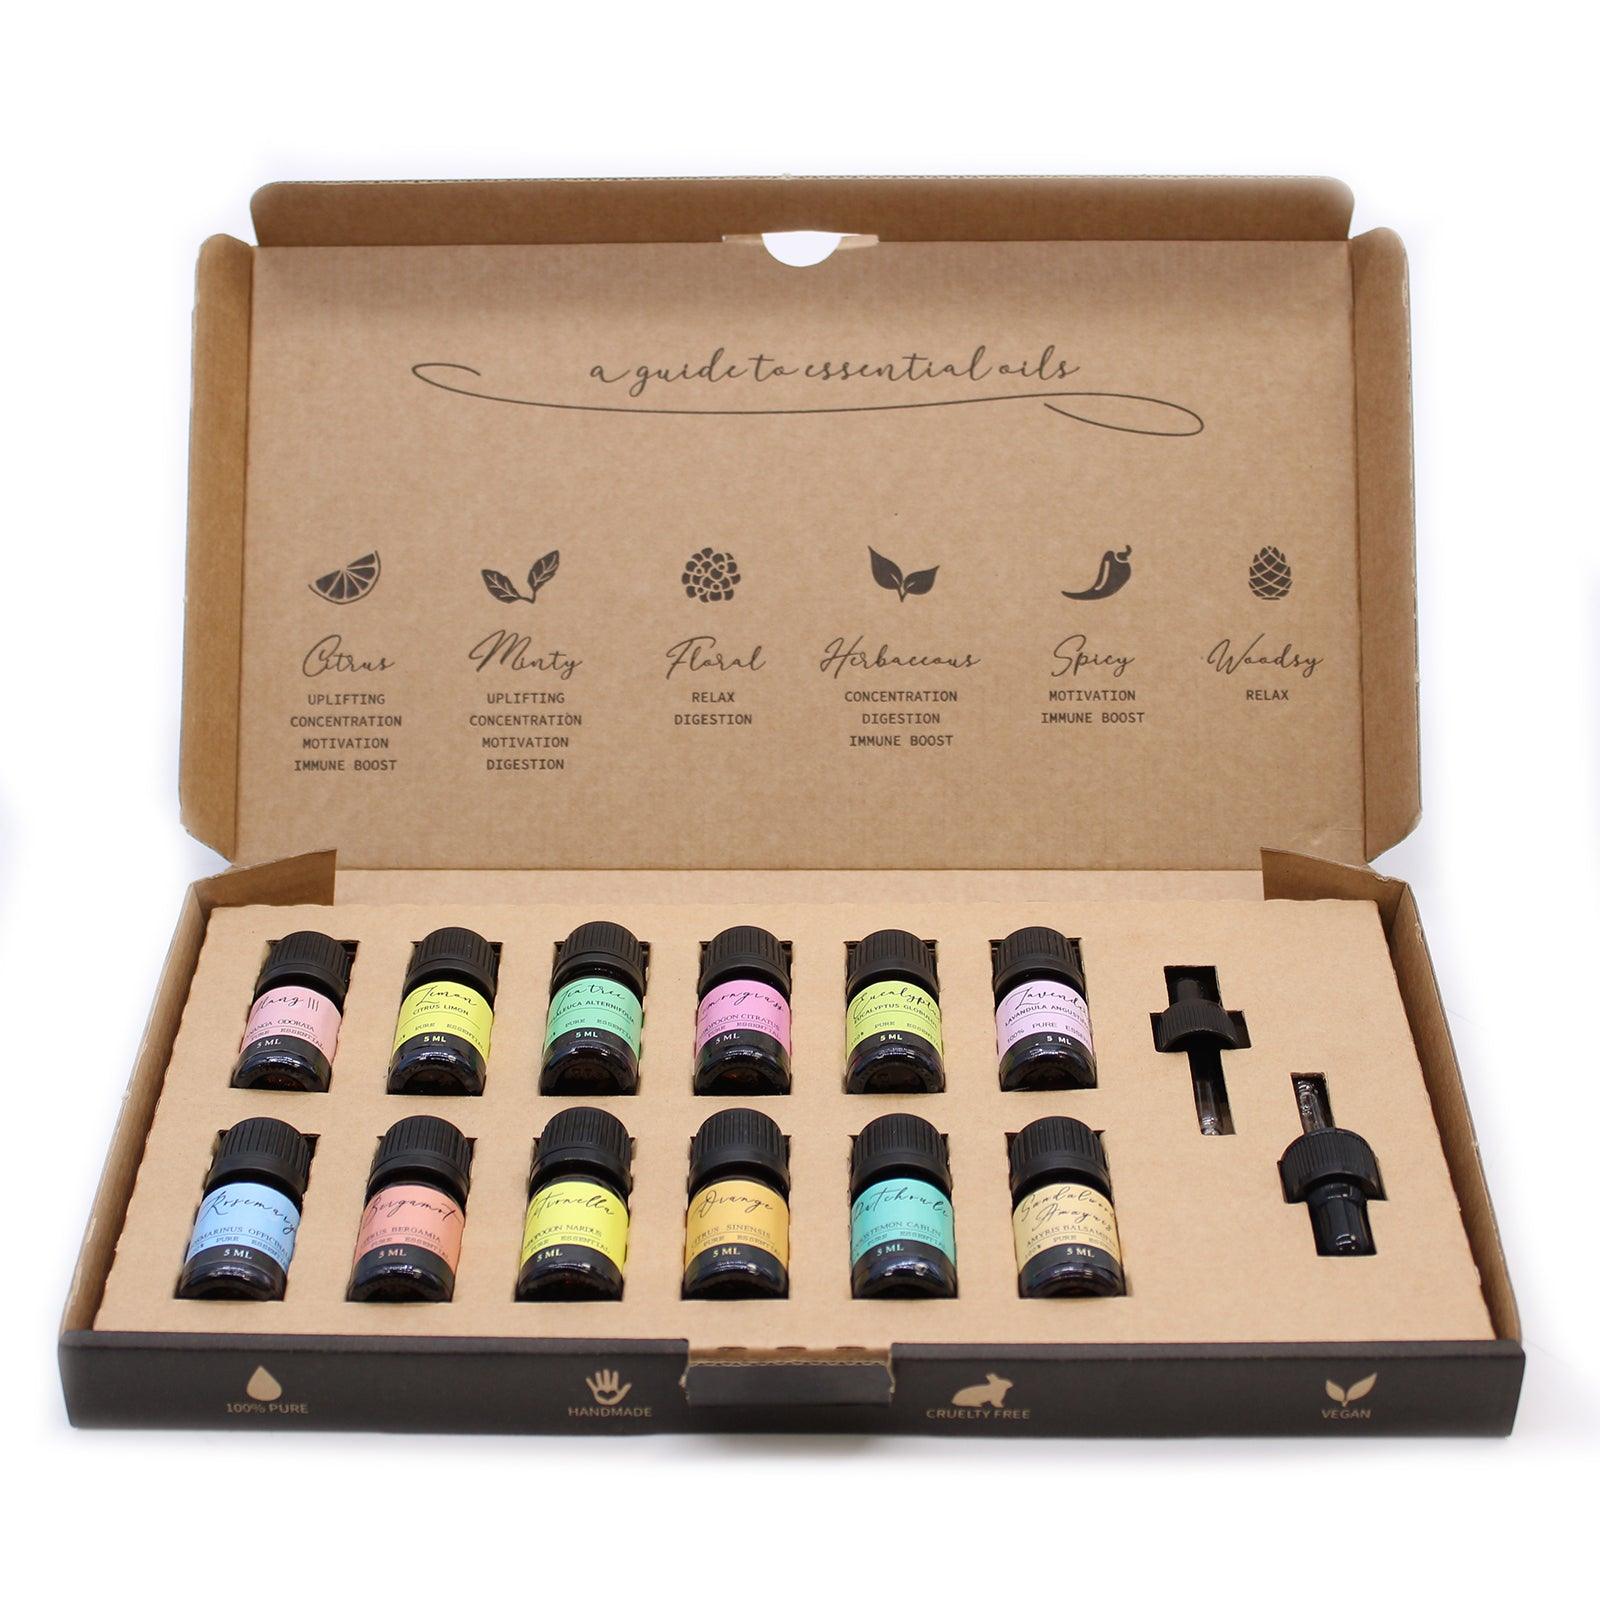 Aromatherapy Essential Oils Set - The Top 12 - Charming Spaces